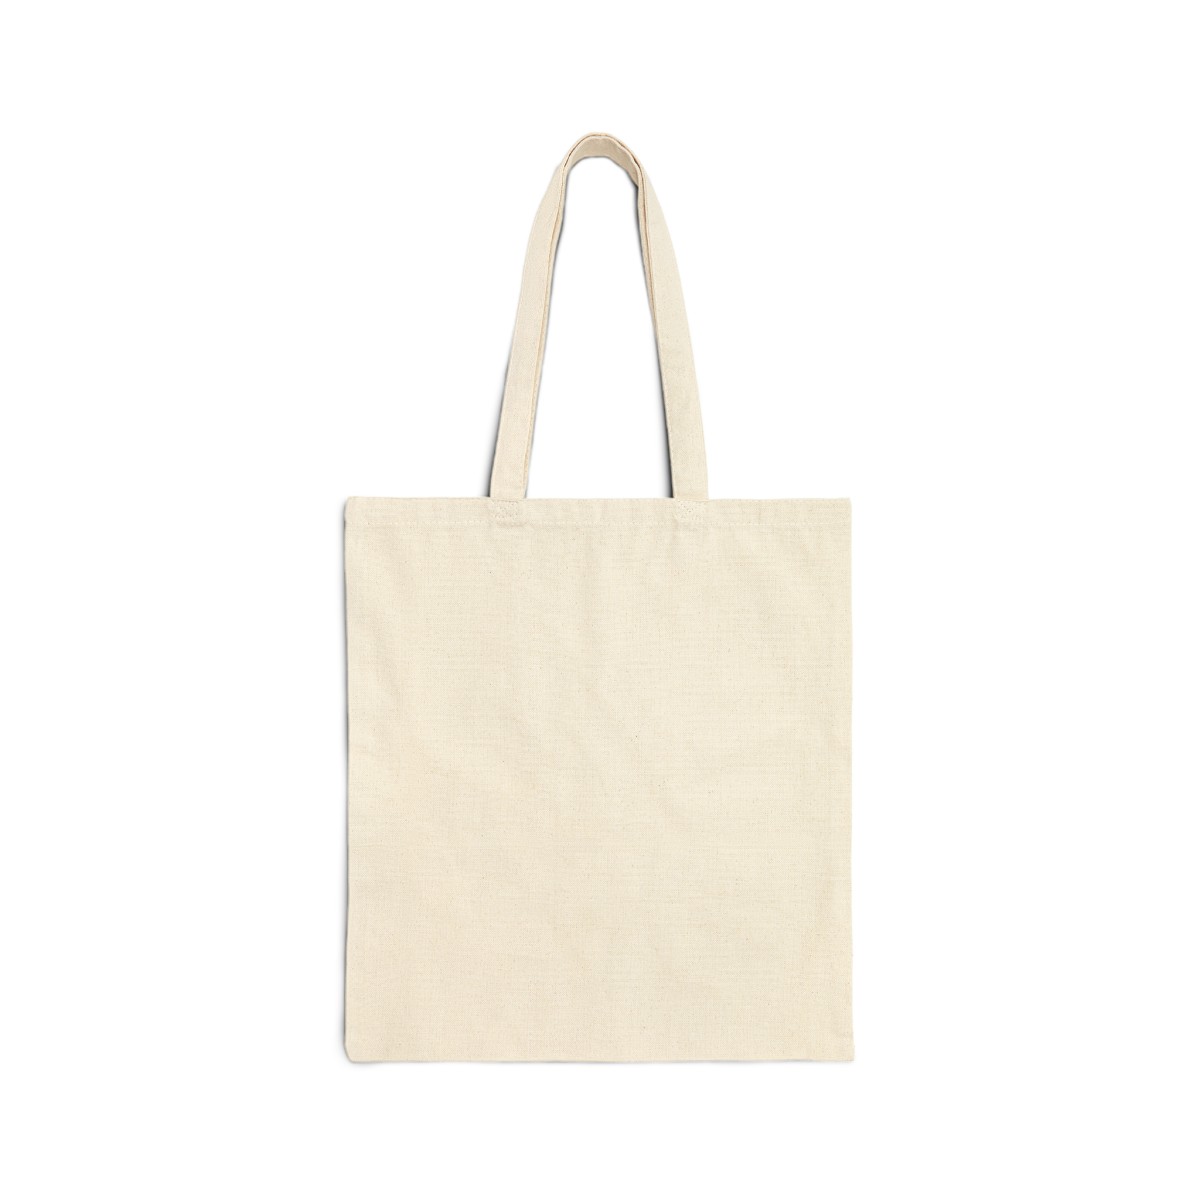 Old Erie Canal Heritage Park Cotton Canvas Tote Bag product thumbnail image